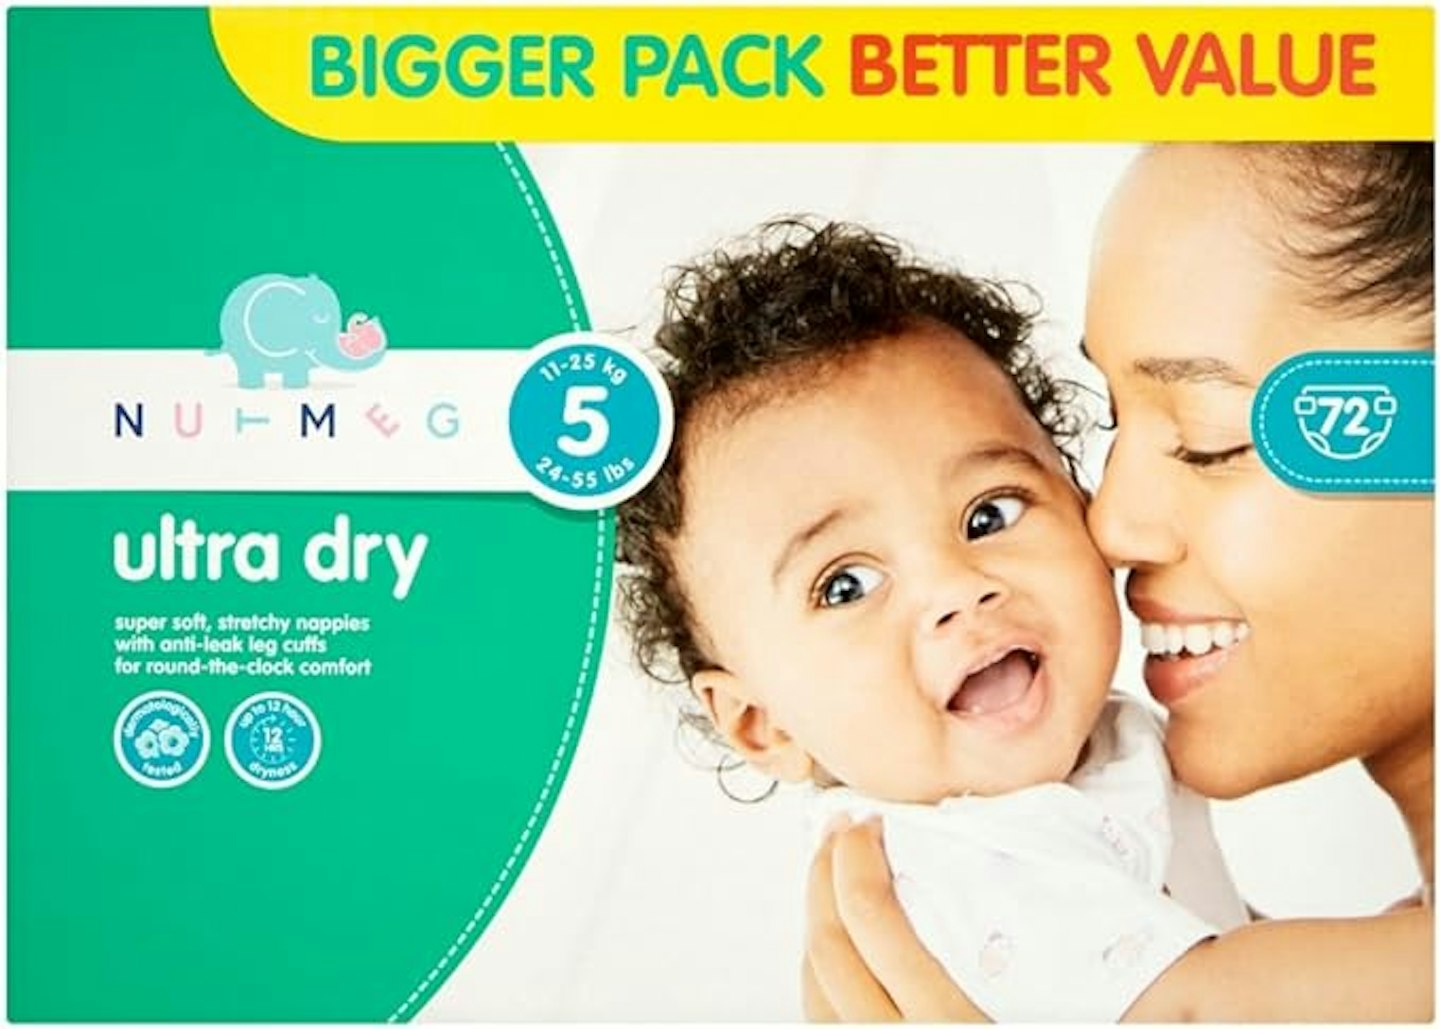 Morrisons Nutmeg Ultra Dry Nappies